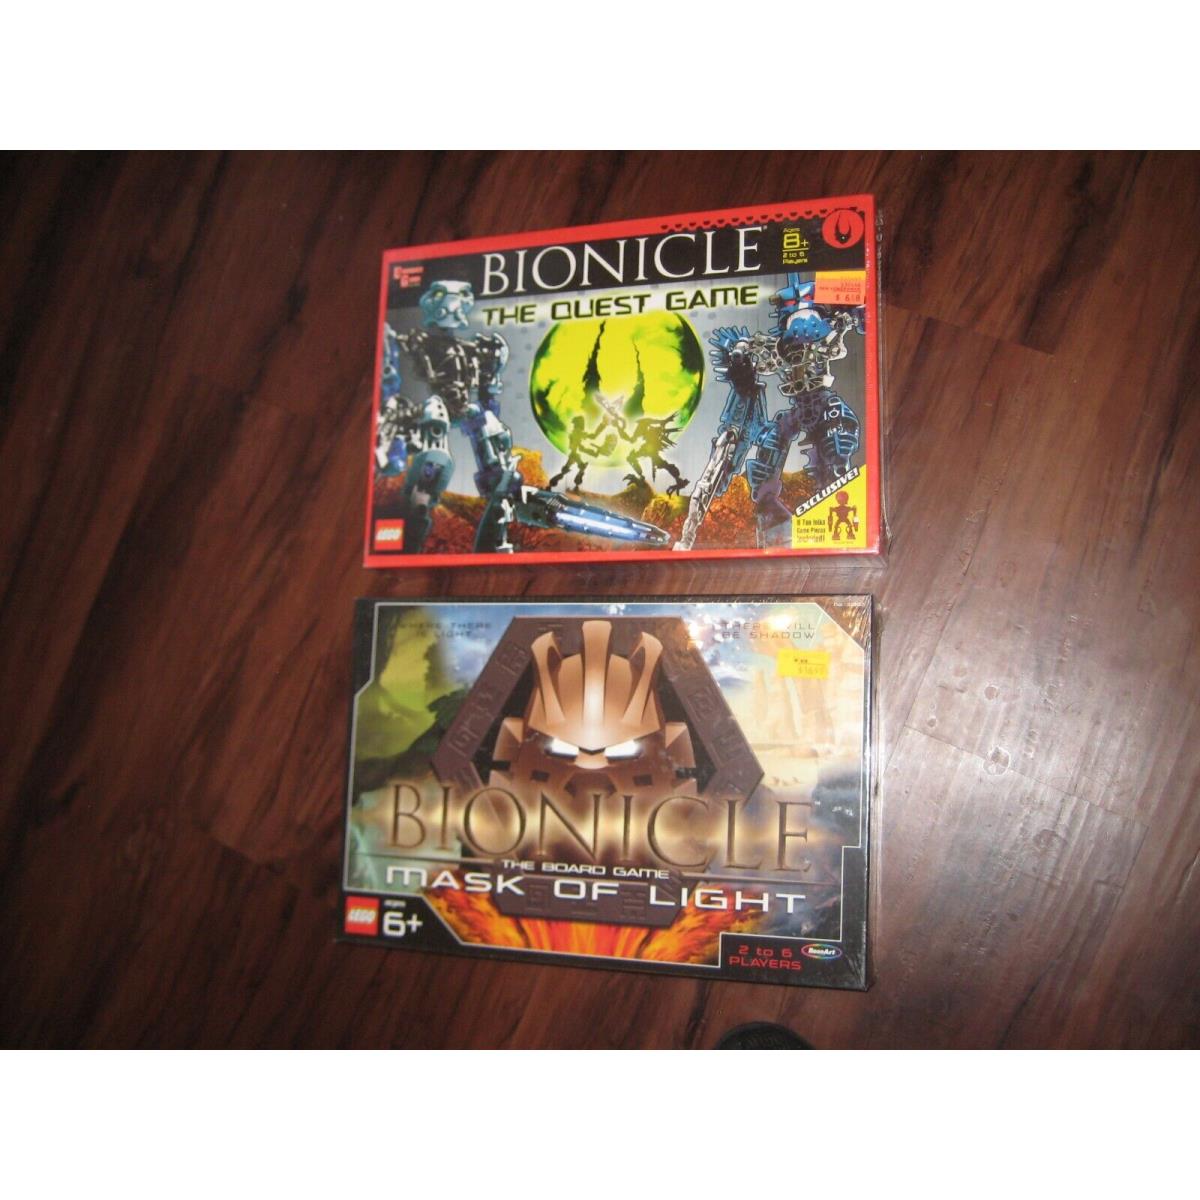 Lego Bionicle: The Quest Game 01754 Mask of Light Game